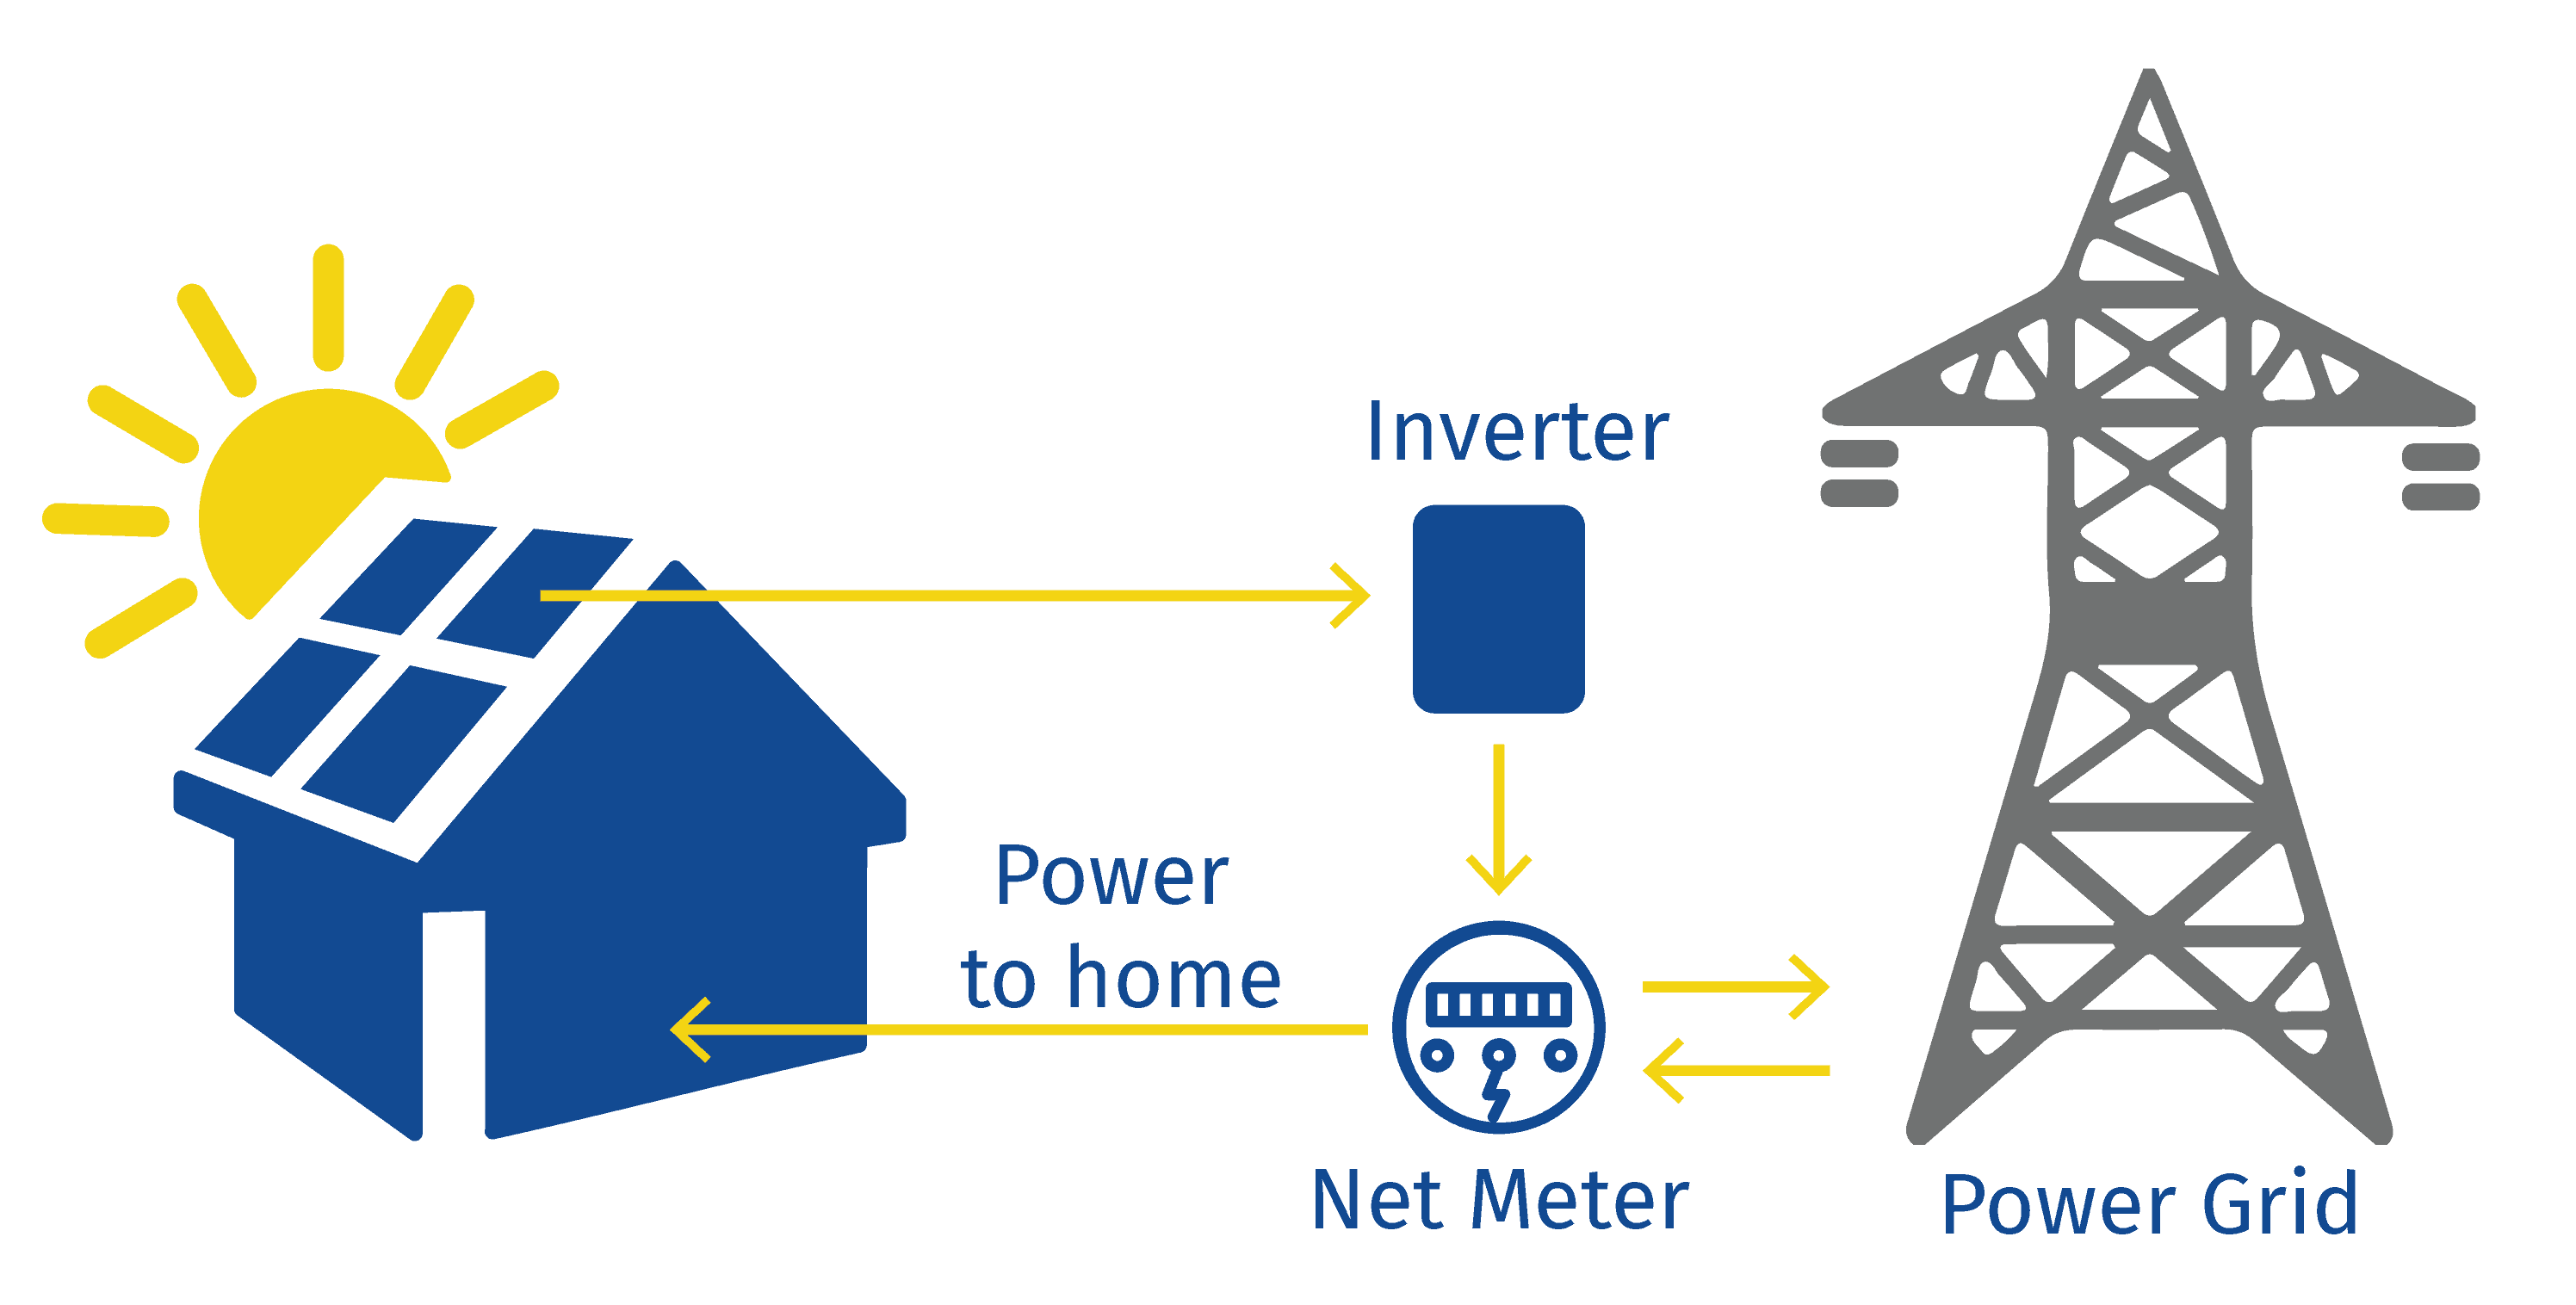 Net meters and inverters can sell power you do not use back to the grid